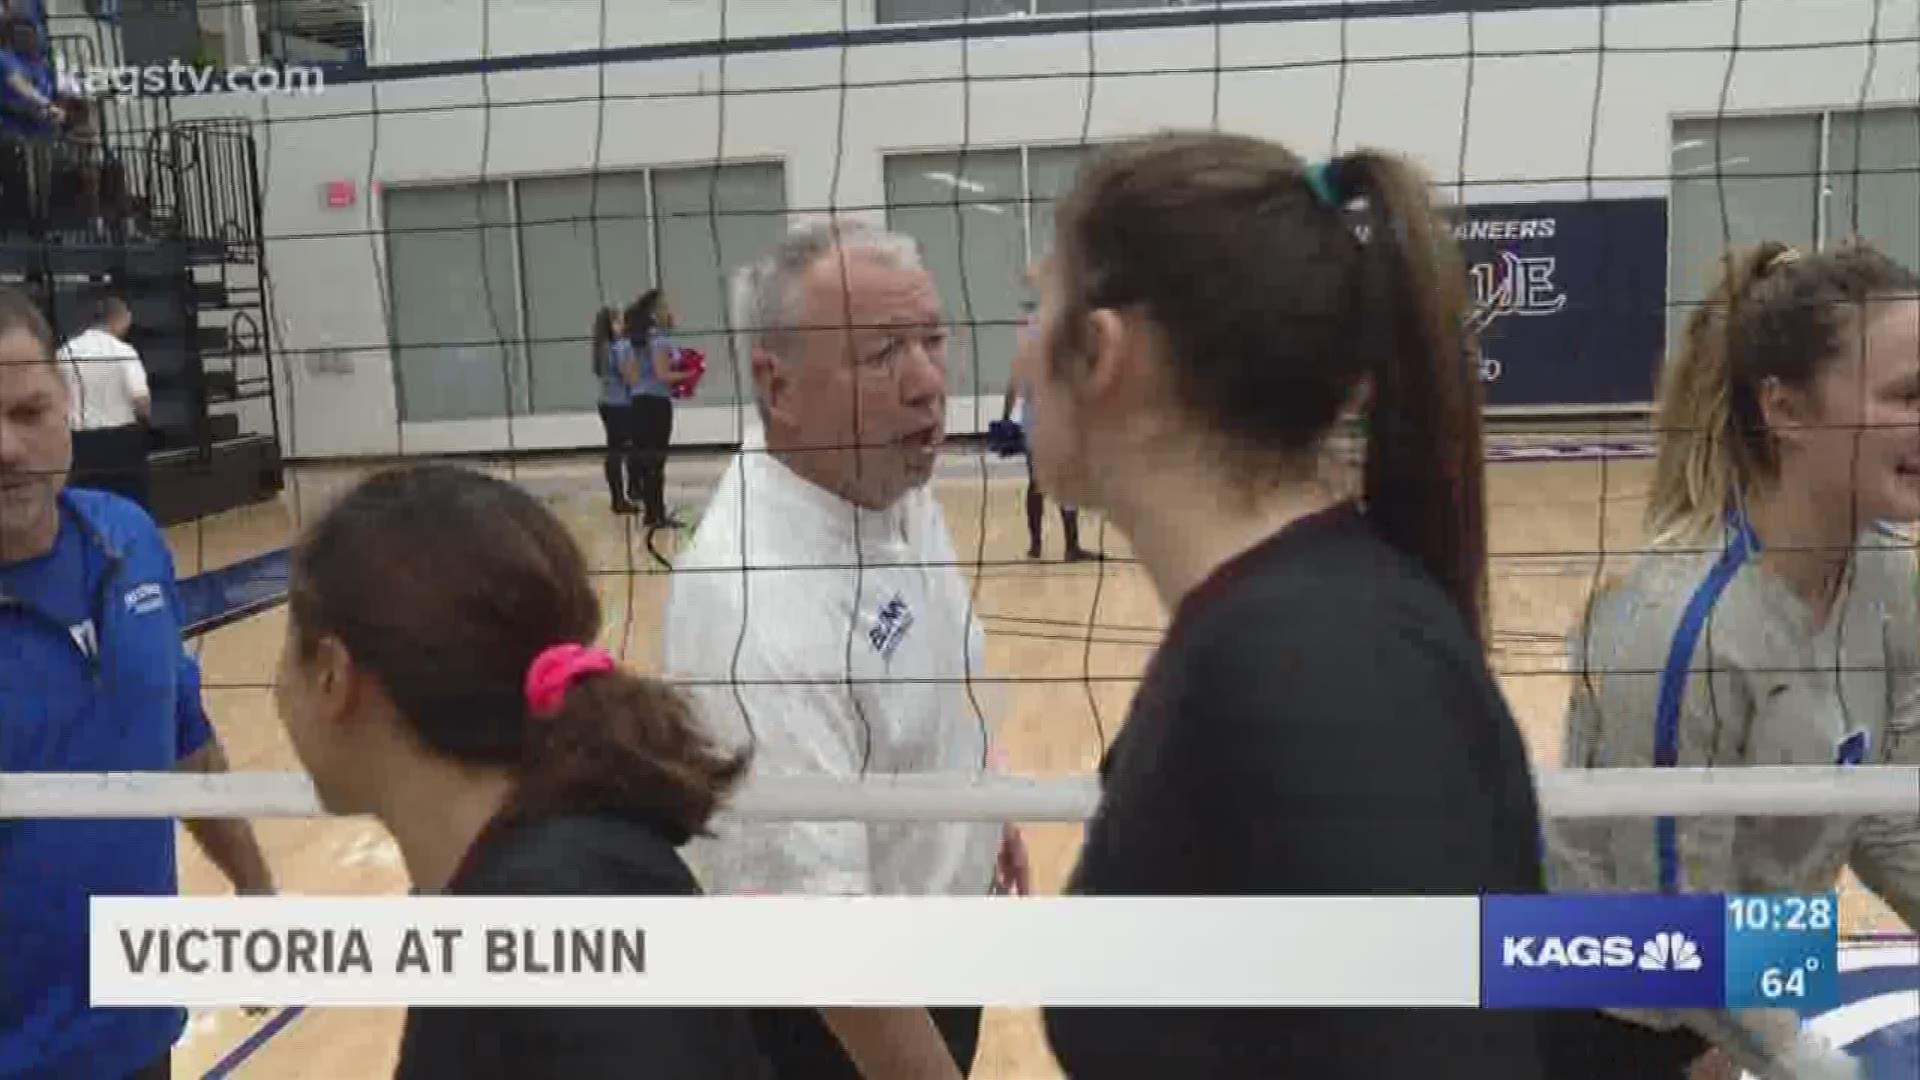 The Blinn volleyball team has already clinched the Region XIV South Zone championship.